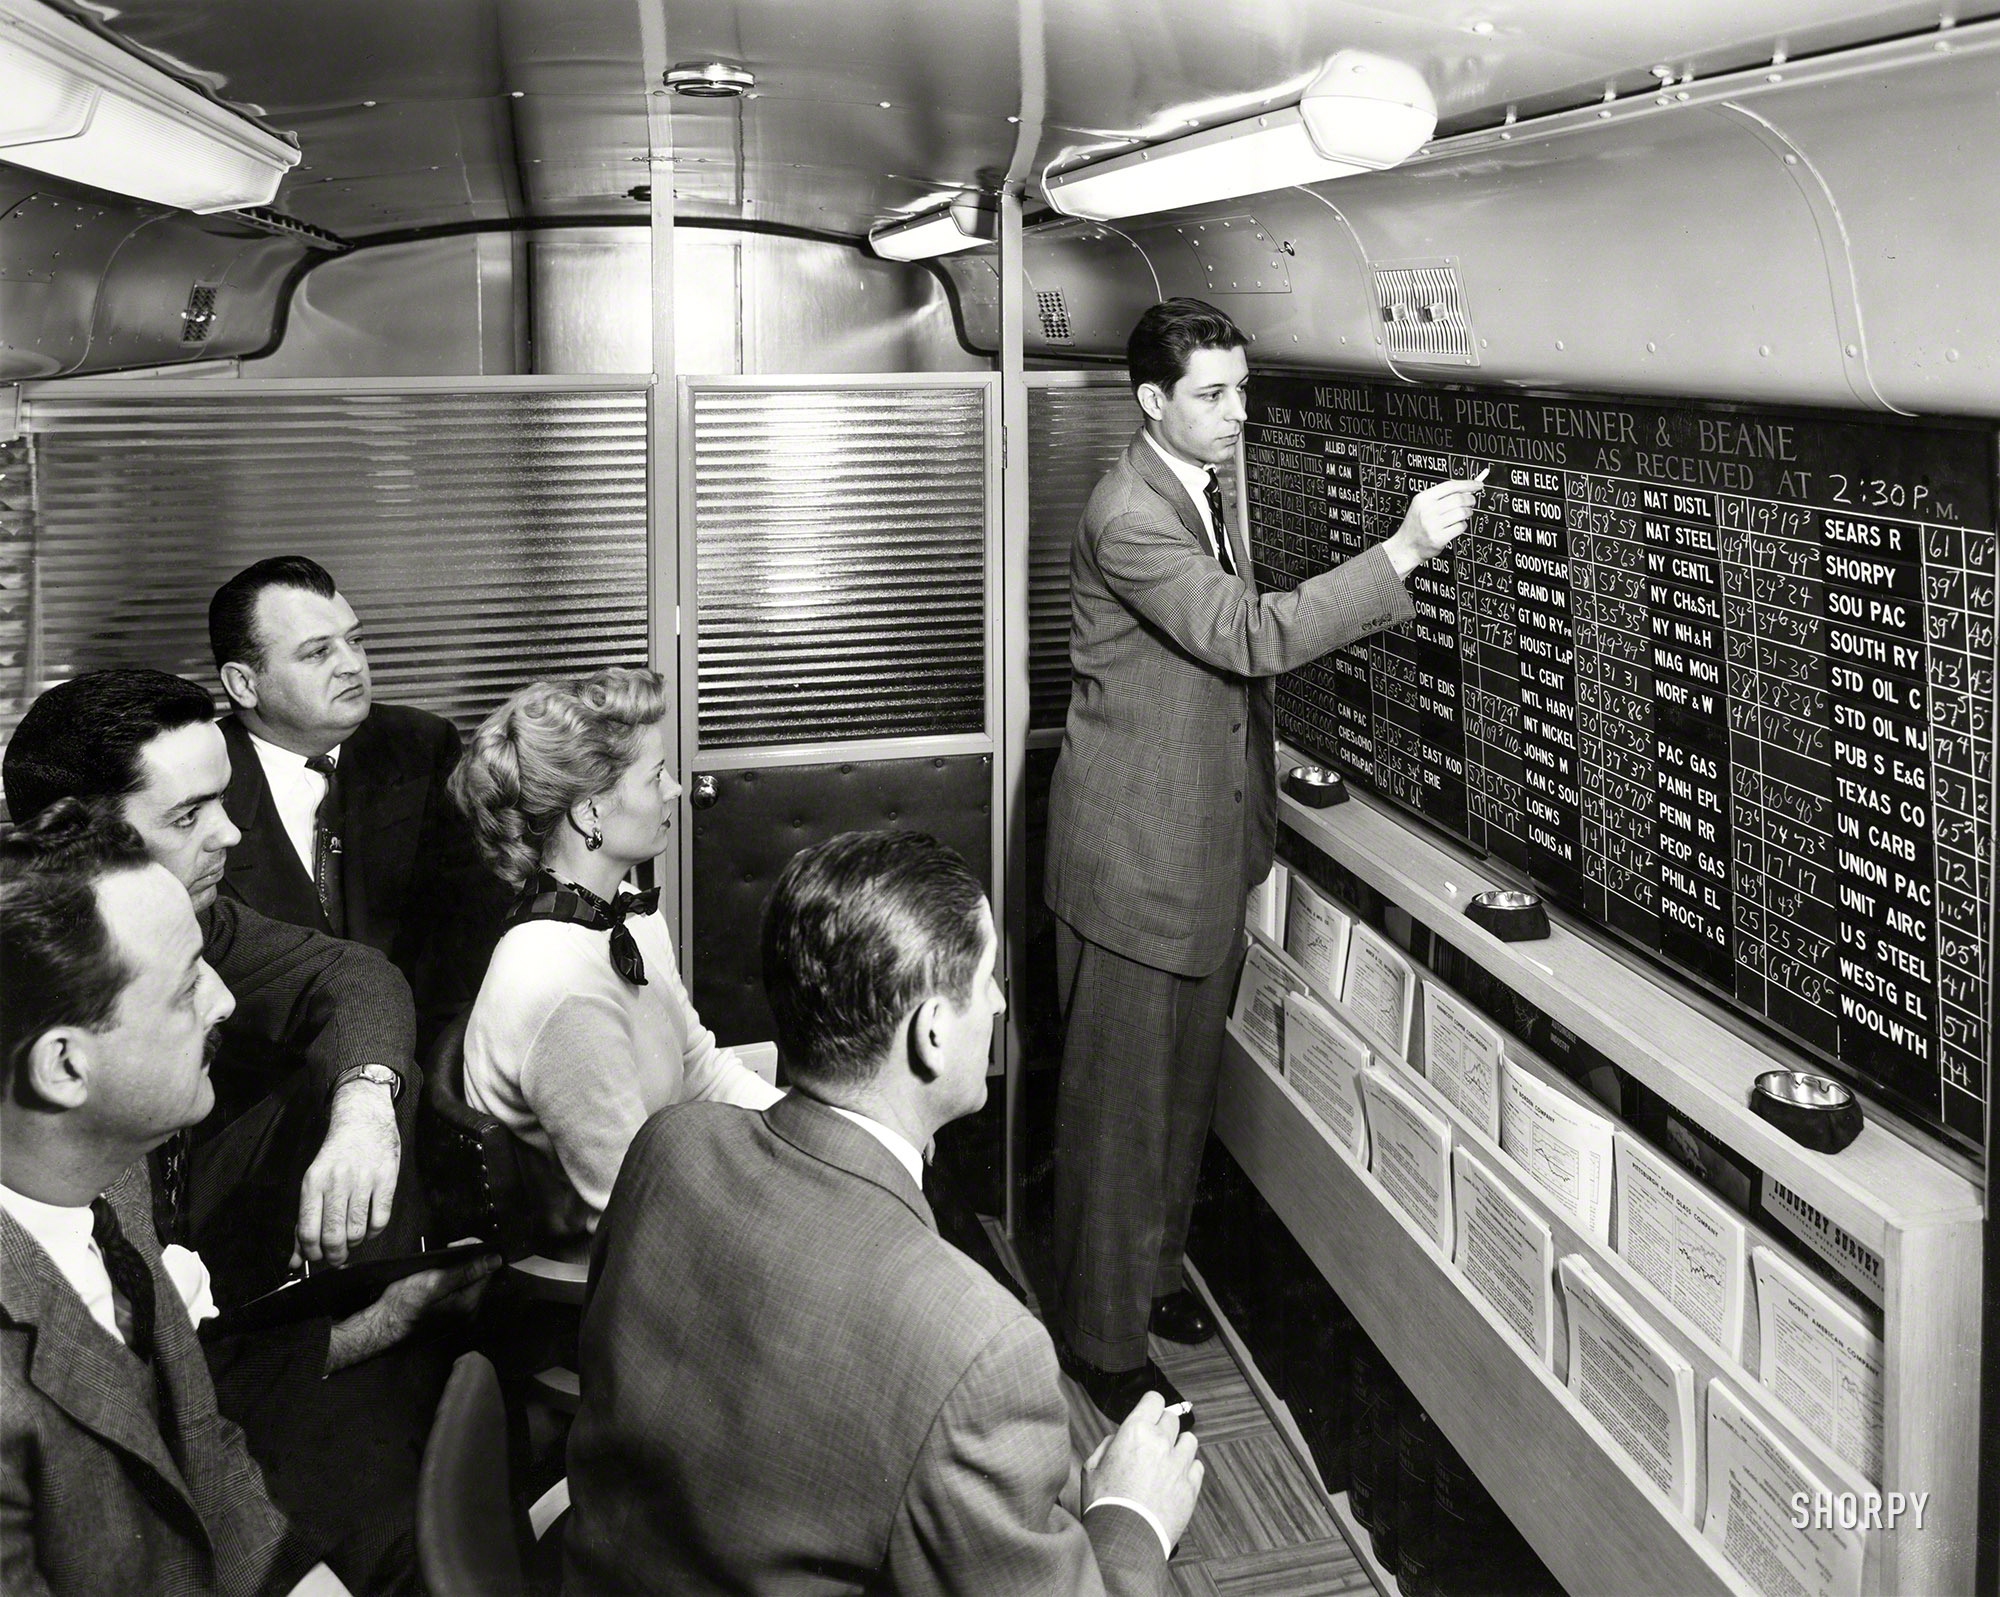 &nbsp; &nbsp; &nbsp; &nbsp; So how does the account exec know what the prices are?
1954. "Merrill Lynch account executive chalks up current stock prices on quotation board in firm's new mobile office." One of the earlier mobile apps. View full size.